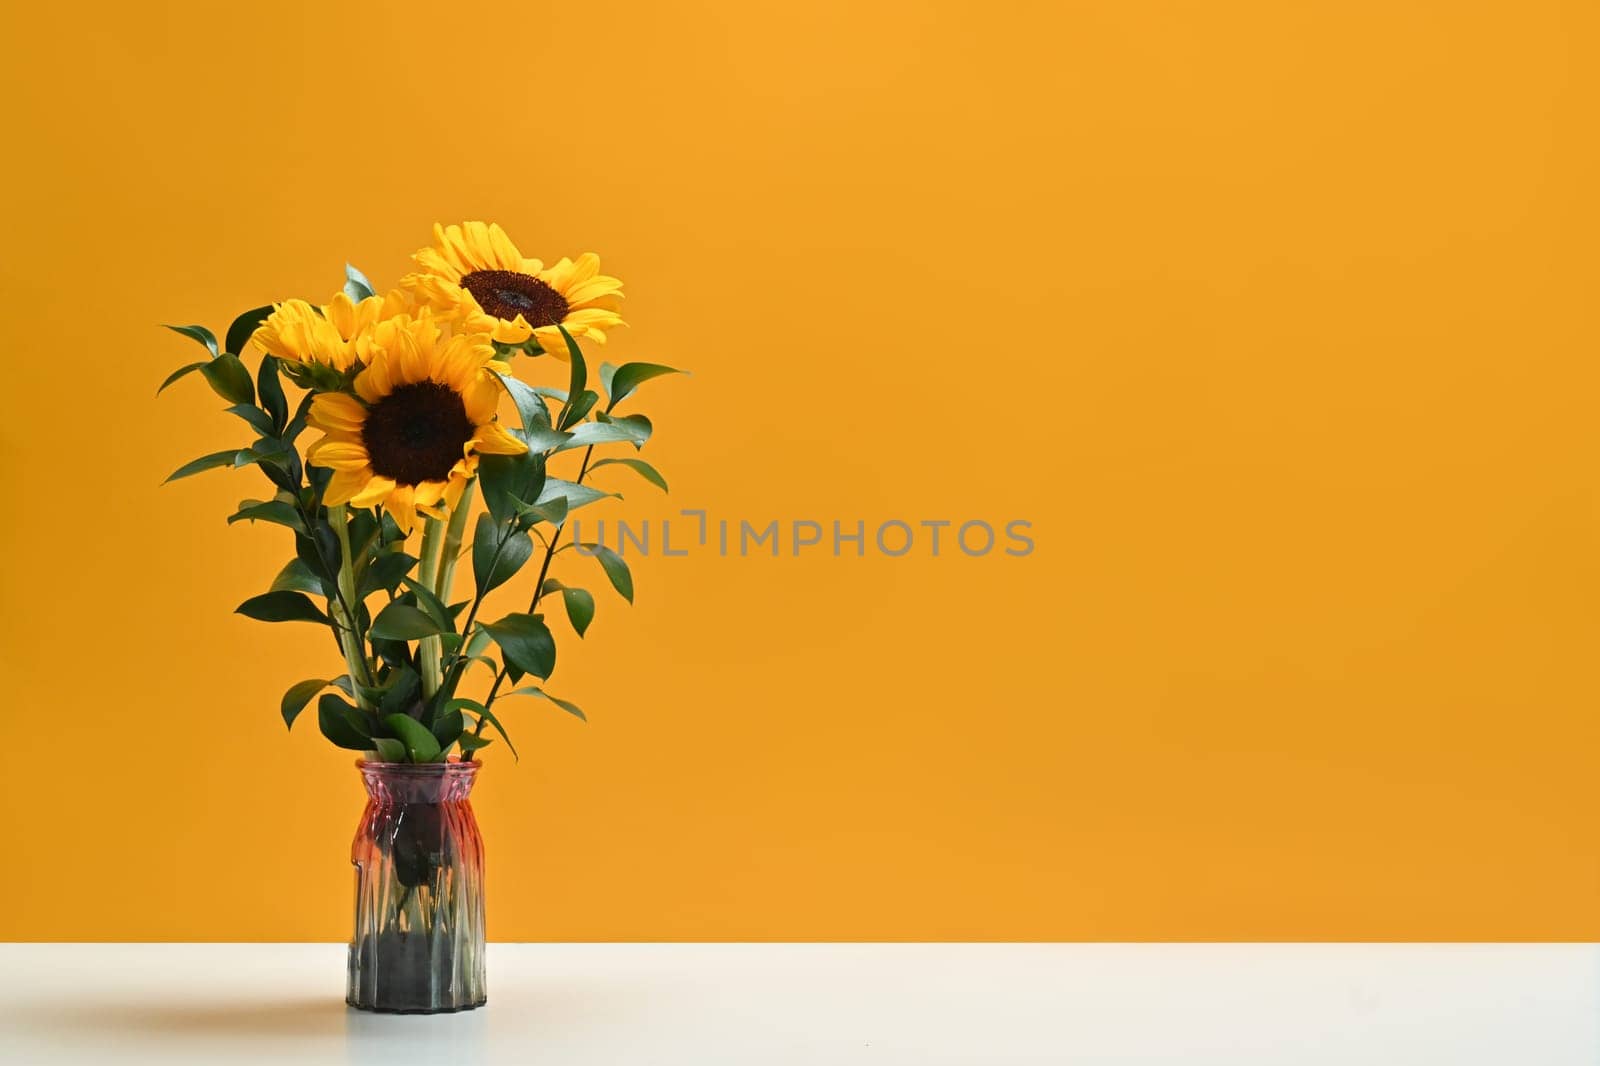 Sunflowers in vase over yellow background with copy space. Natural background, autumn or summer concept.